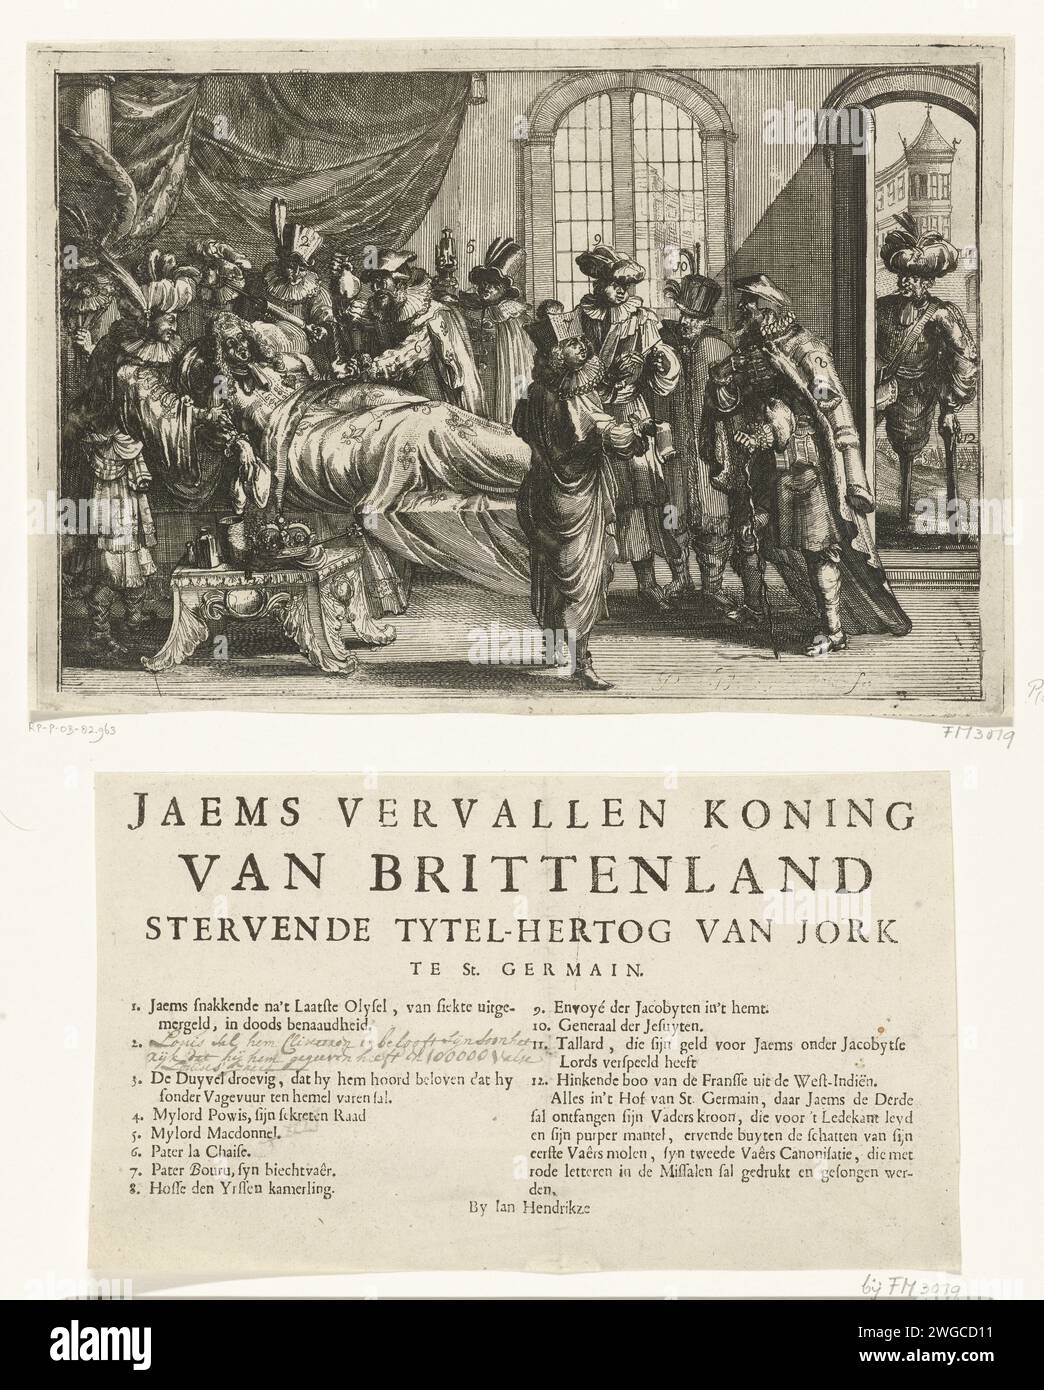 Cartoon on the death of Jacobus II, 1701, 1701 print King Jacobus II on his death bed, December 16, 1701. Doctors and courtiers stand around the king's bed, a Turkish physician and Louis XIV on the left with a cloud sprayer to purify the king. To the right of the bed, a group of courtings discusses the situation, including confessor Father Bouru. On the right in the doorway a French messenger from the West Indies, with turban, wooden leg and stool. Print and a text sheet with the title and the legend 1-12. Antwerp paper etching / letterpress printing deathbed. political caricatures and satires Stock Photo